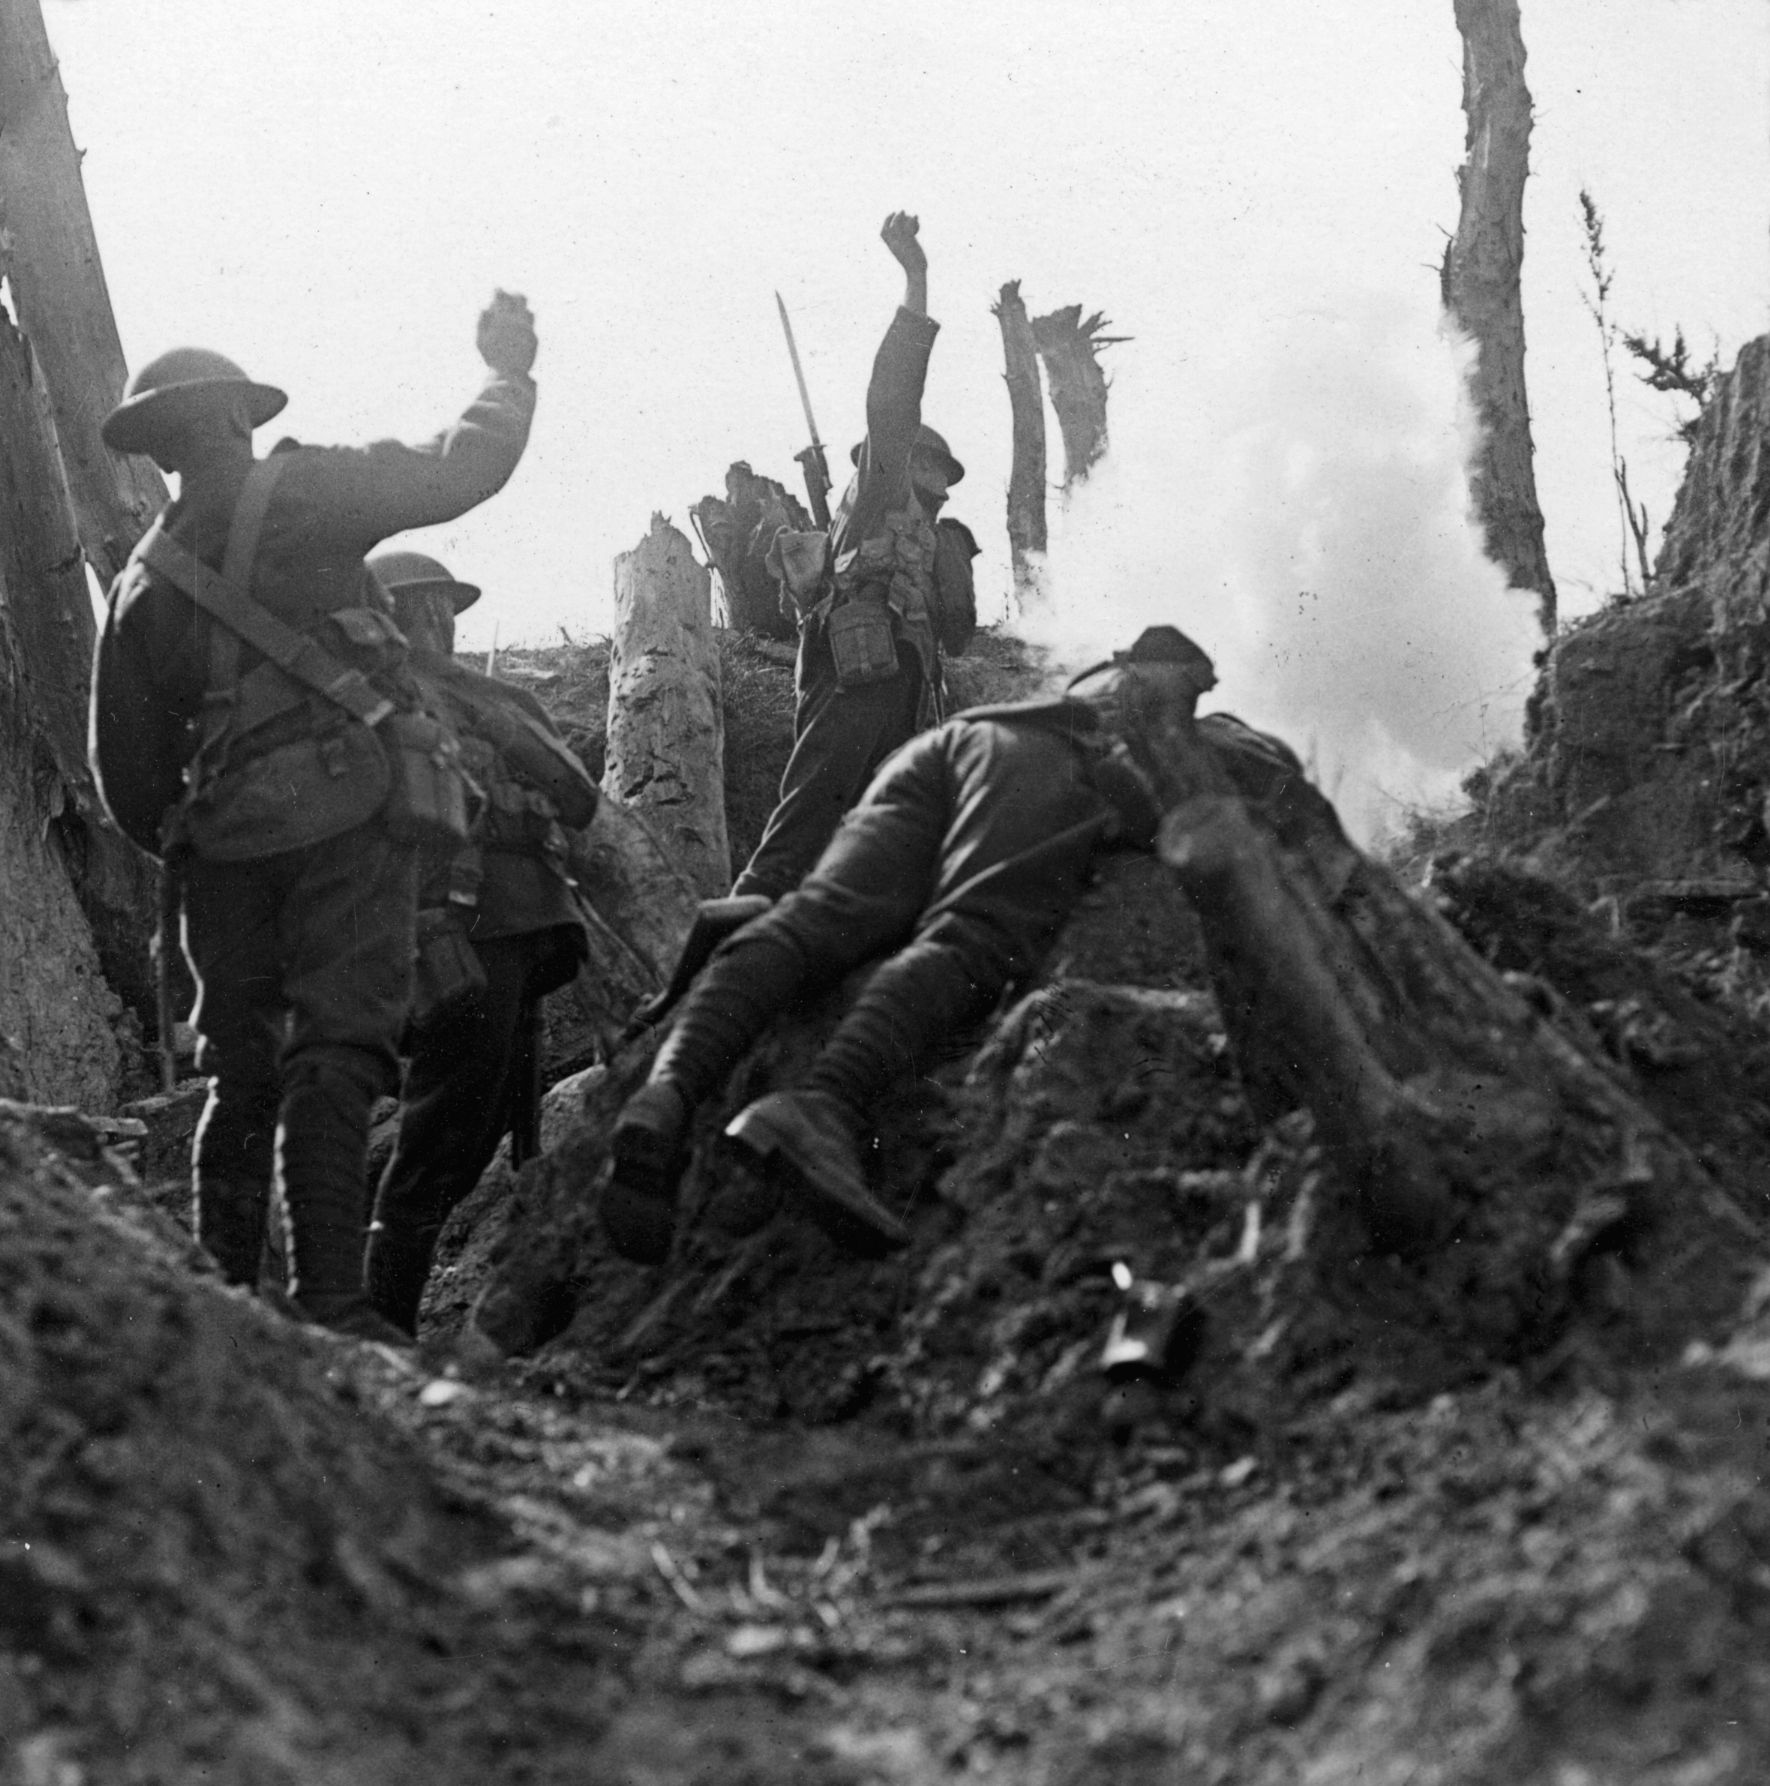 Perhaps staged after the battle, this photo claims to show the 11th Battalion in action at Polygon Wood in September 1917. Tolkien served as a signal officer.